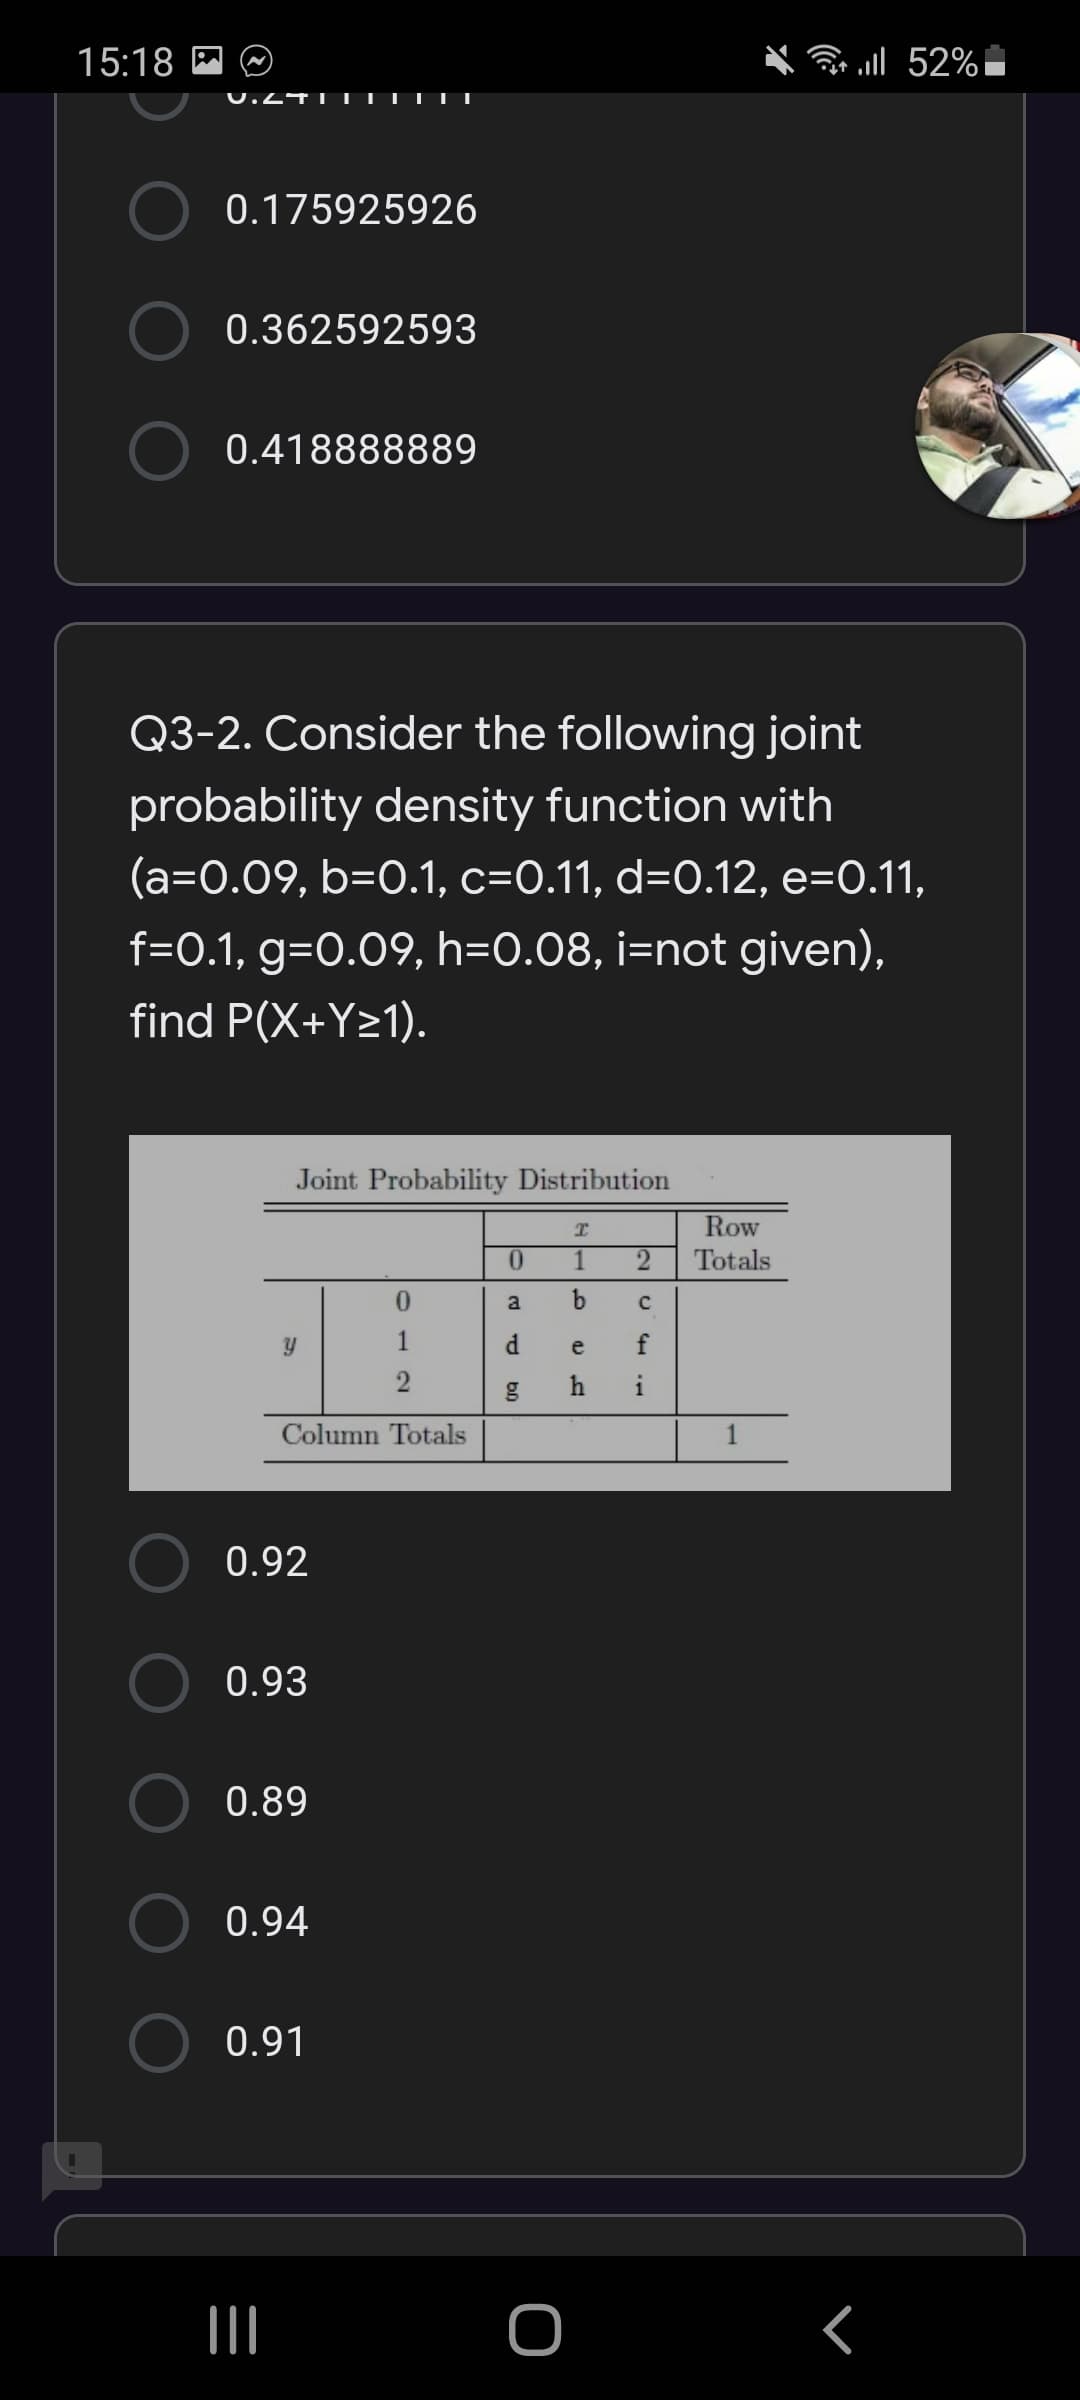 Q3-2. Consider the following joint
probability density function with
(a=0.09, b=0.1, c=0.11, d=0.12, e=0.11,
f=0.1, g=0.09, h=0.08, i=not given),
find P(X+Y>1).
Joint Probability Distribution
Row
0.
1
Totals
0.
a
1
d.
e
f
Column Totals
0.92
0.93
0.89
0.94
0.91
9,
